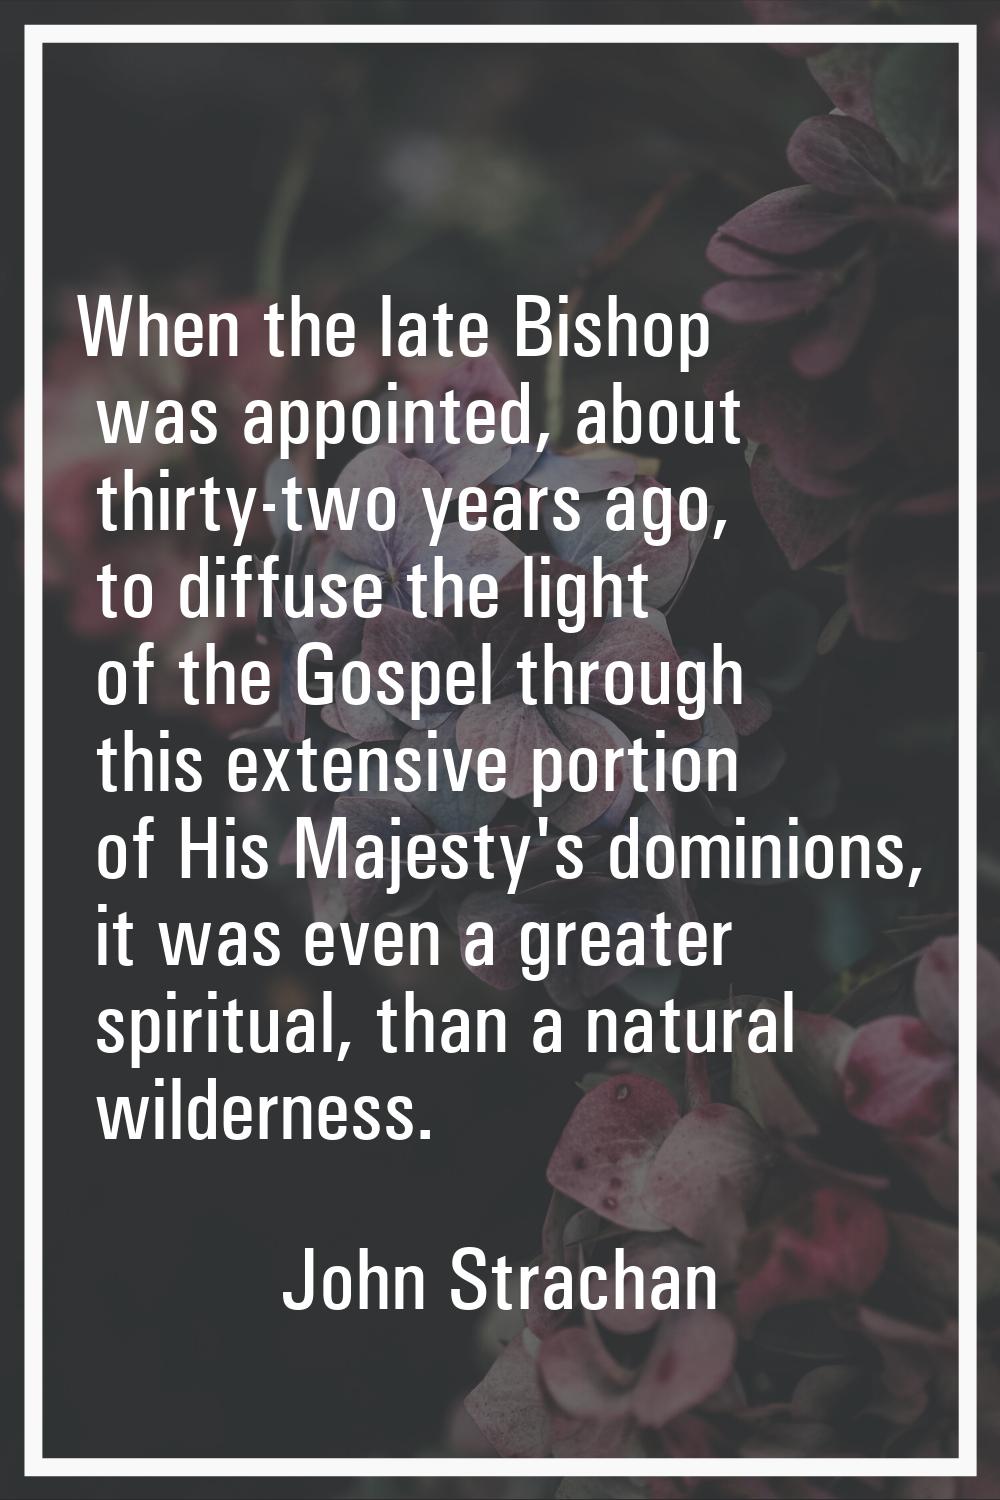 When the late Bishop was appointed, about thirty-two years ago, to diffuse the light of the Gospel 